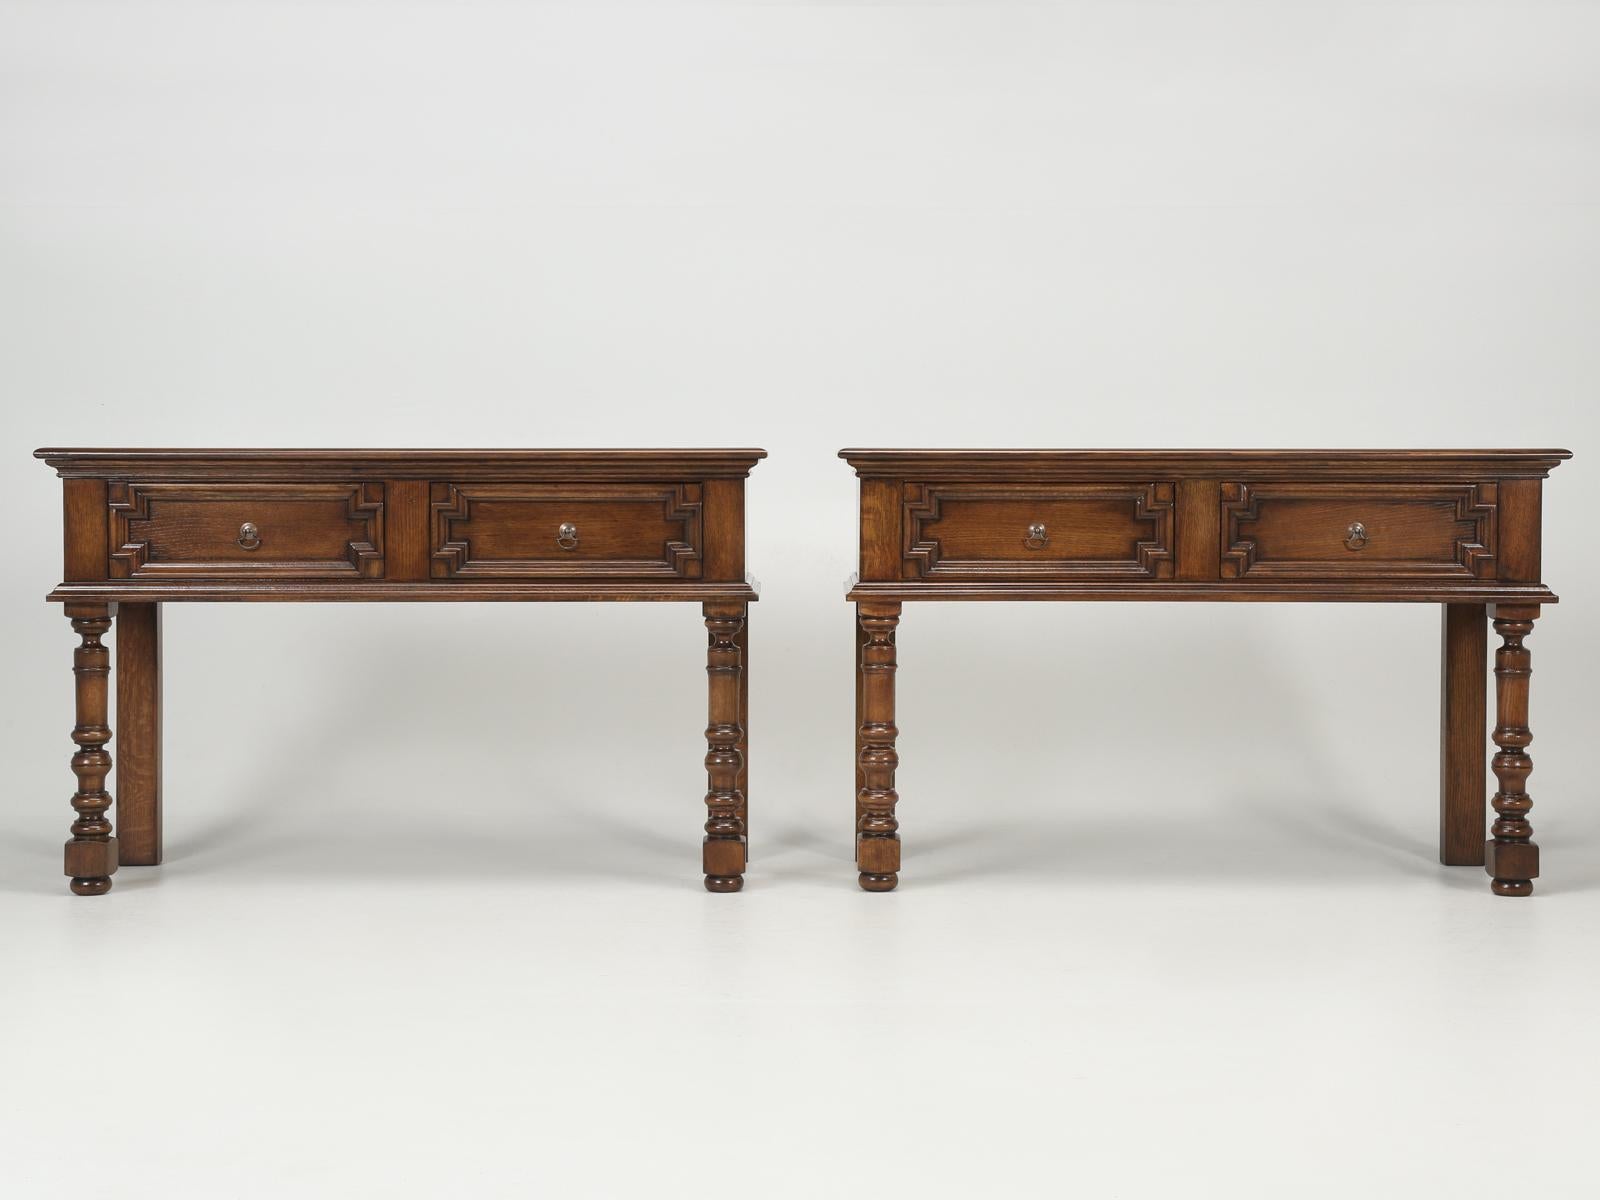 Pair of custom-made English console tables that are available in any dimension. The pair of console tables were constructed in the style of William & Mary (1700-1725). Our Old Plank English style console tables are made in house or either new